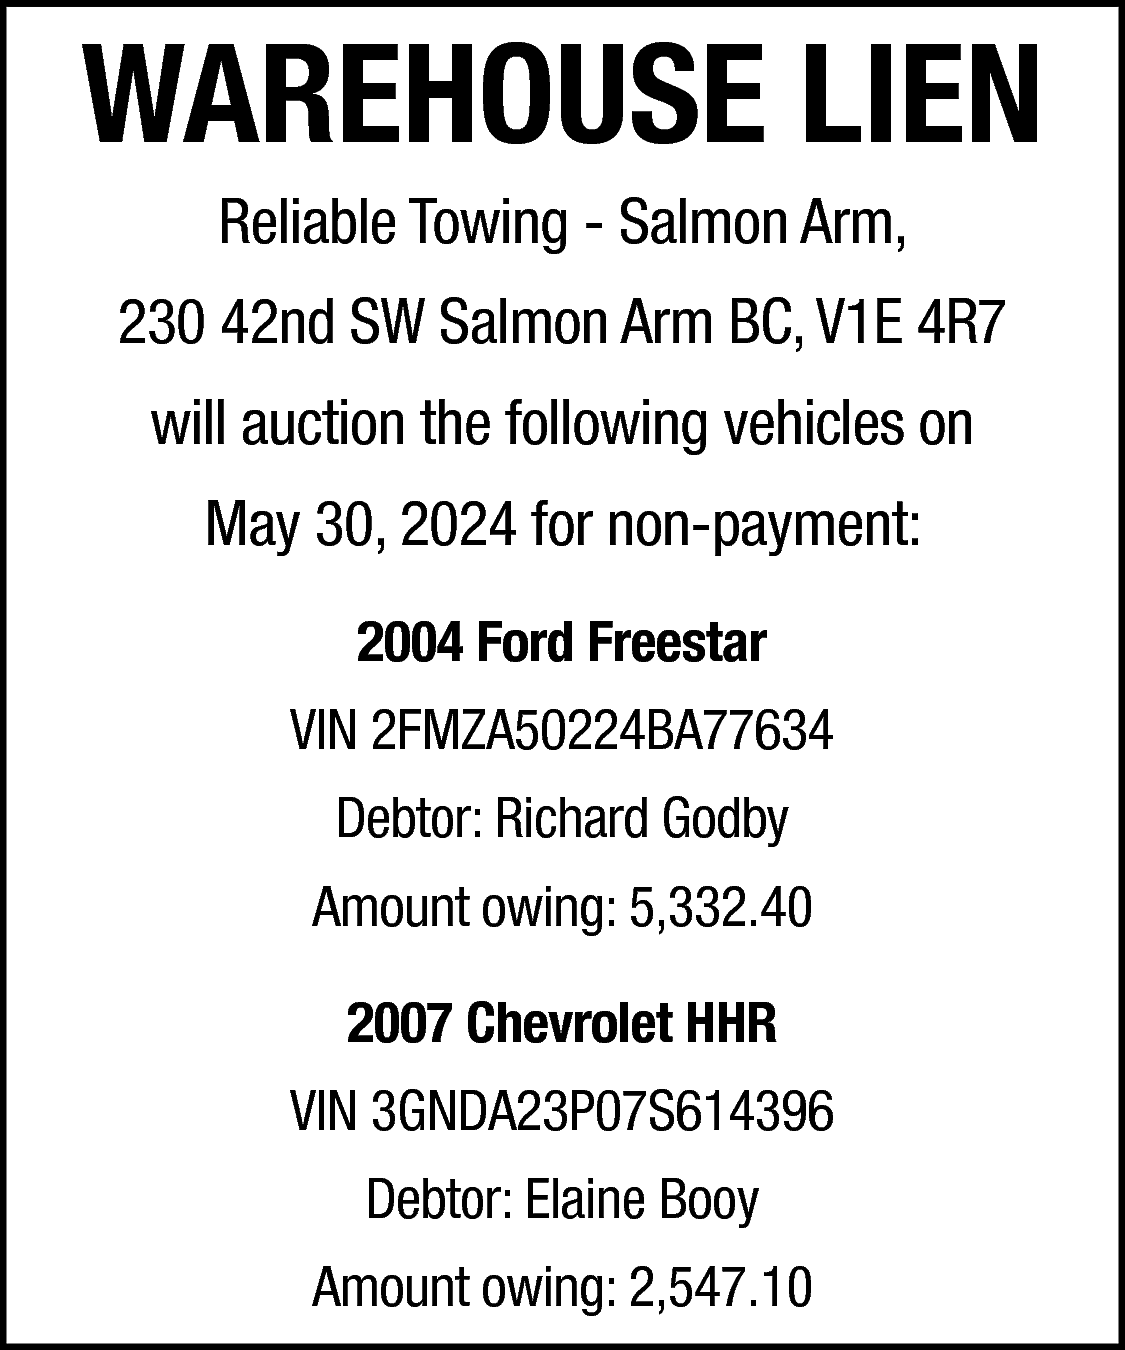 WAREHOUSE LIEN <br>Reliable Towing -  WAREHOUSE LIEN  Reliable Towing - Salmon Arm,    230 42nd SW Salmon Arm BC, V1E 4R7  will auction the following vehicles on  May 30, 2024 for non-payment:  2004 Ford Freestar  VIN 2FMZA50224BA77634  Debtor: Richard Godby  Amount owing: 5,332.40  2007 Chevrolet HHR  VIN 3GNDA23P07S614396  Debtor: Elaine Booy  Amount owing: 2,547.10    